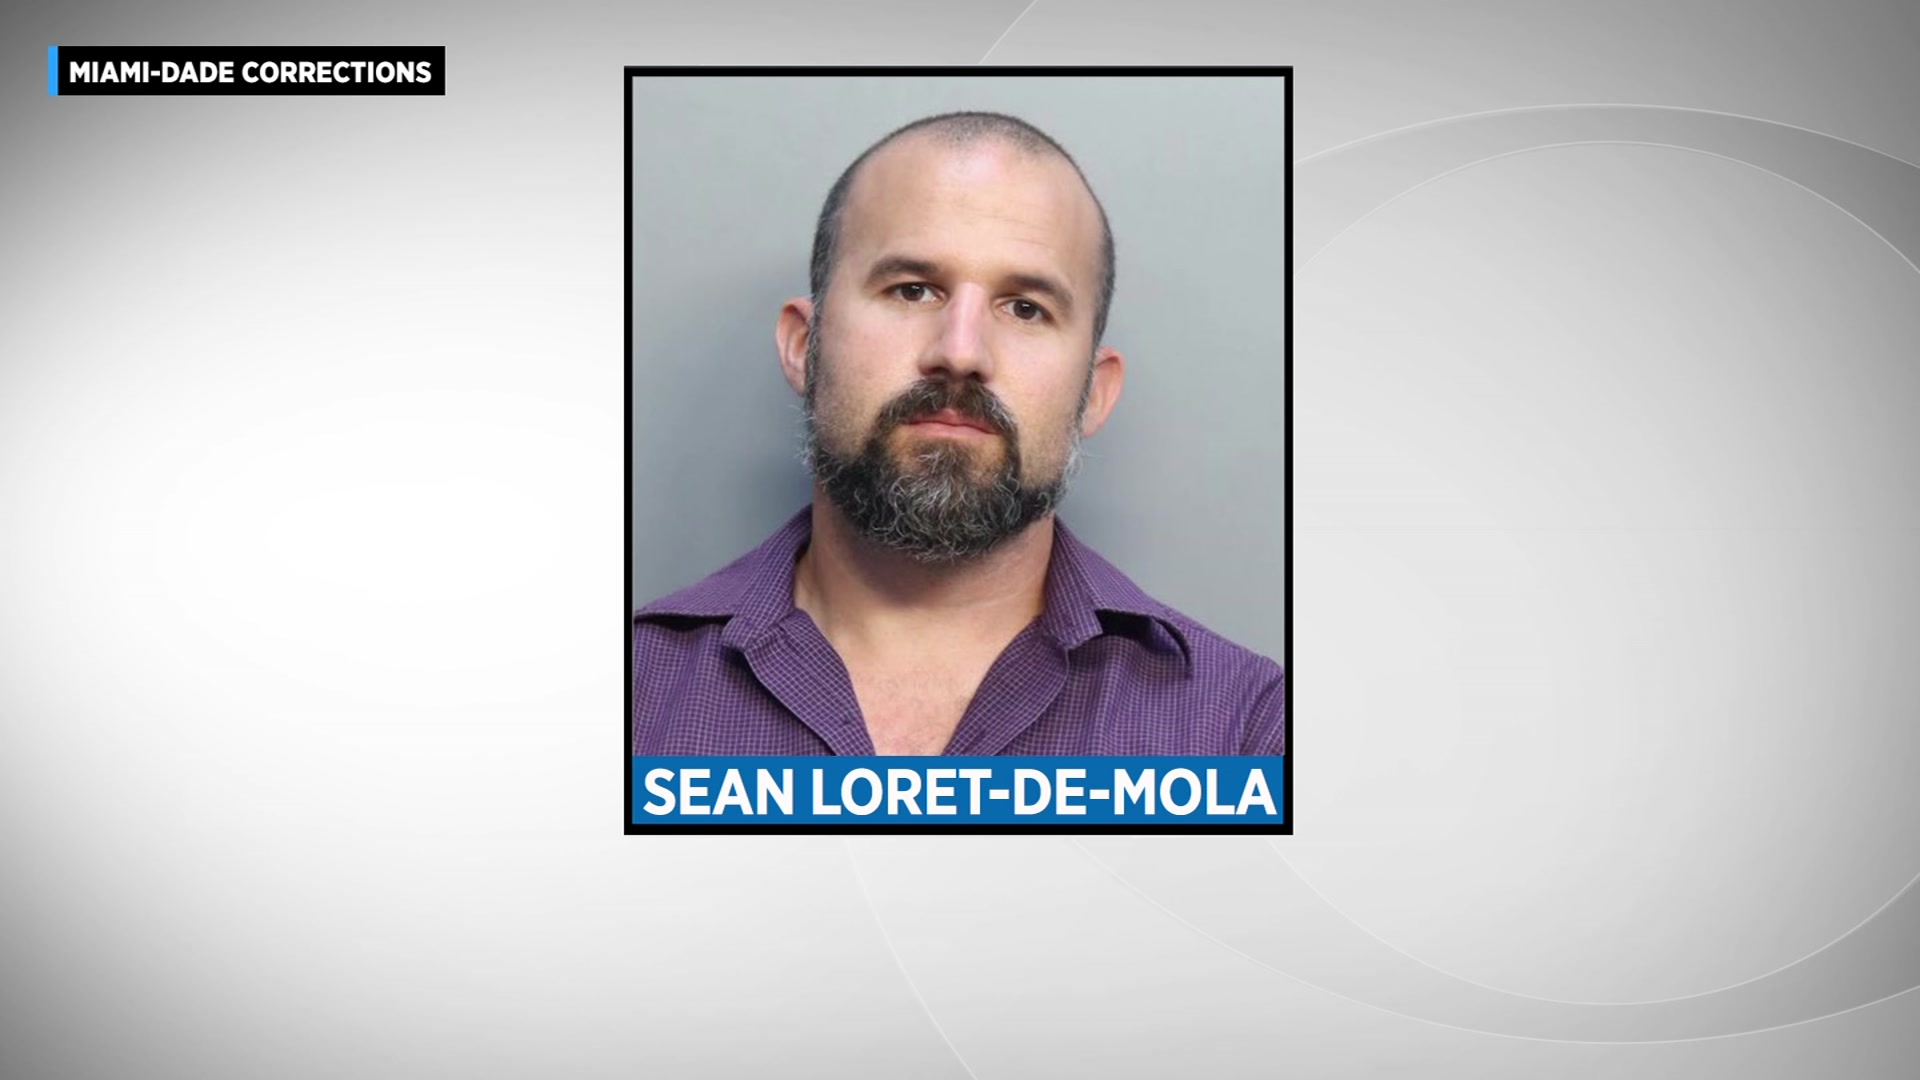 Police: Glades Middle School Teacher Arrested After Pursuing Romantic Relationship With Former Student